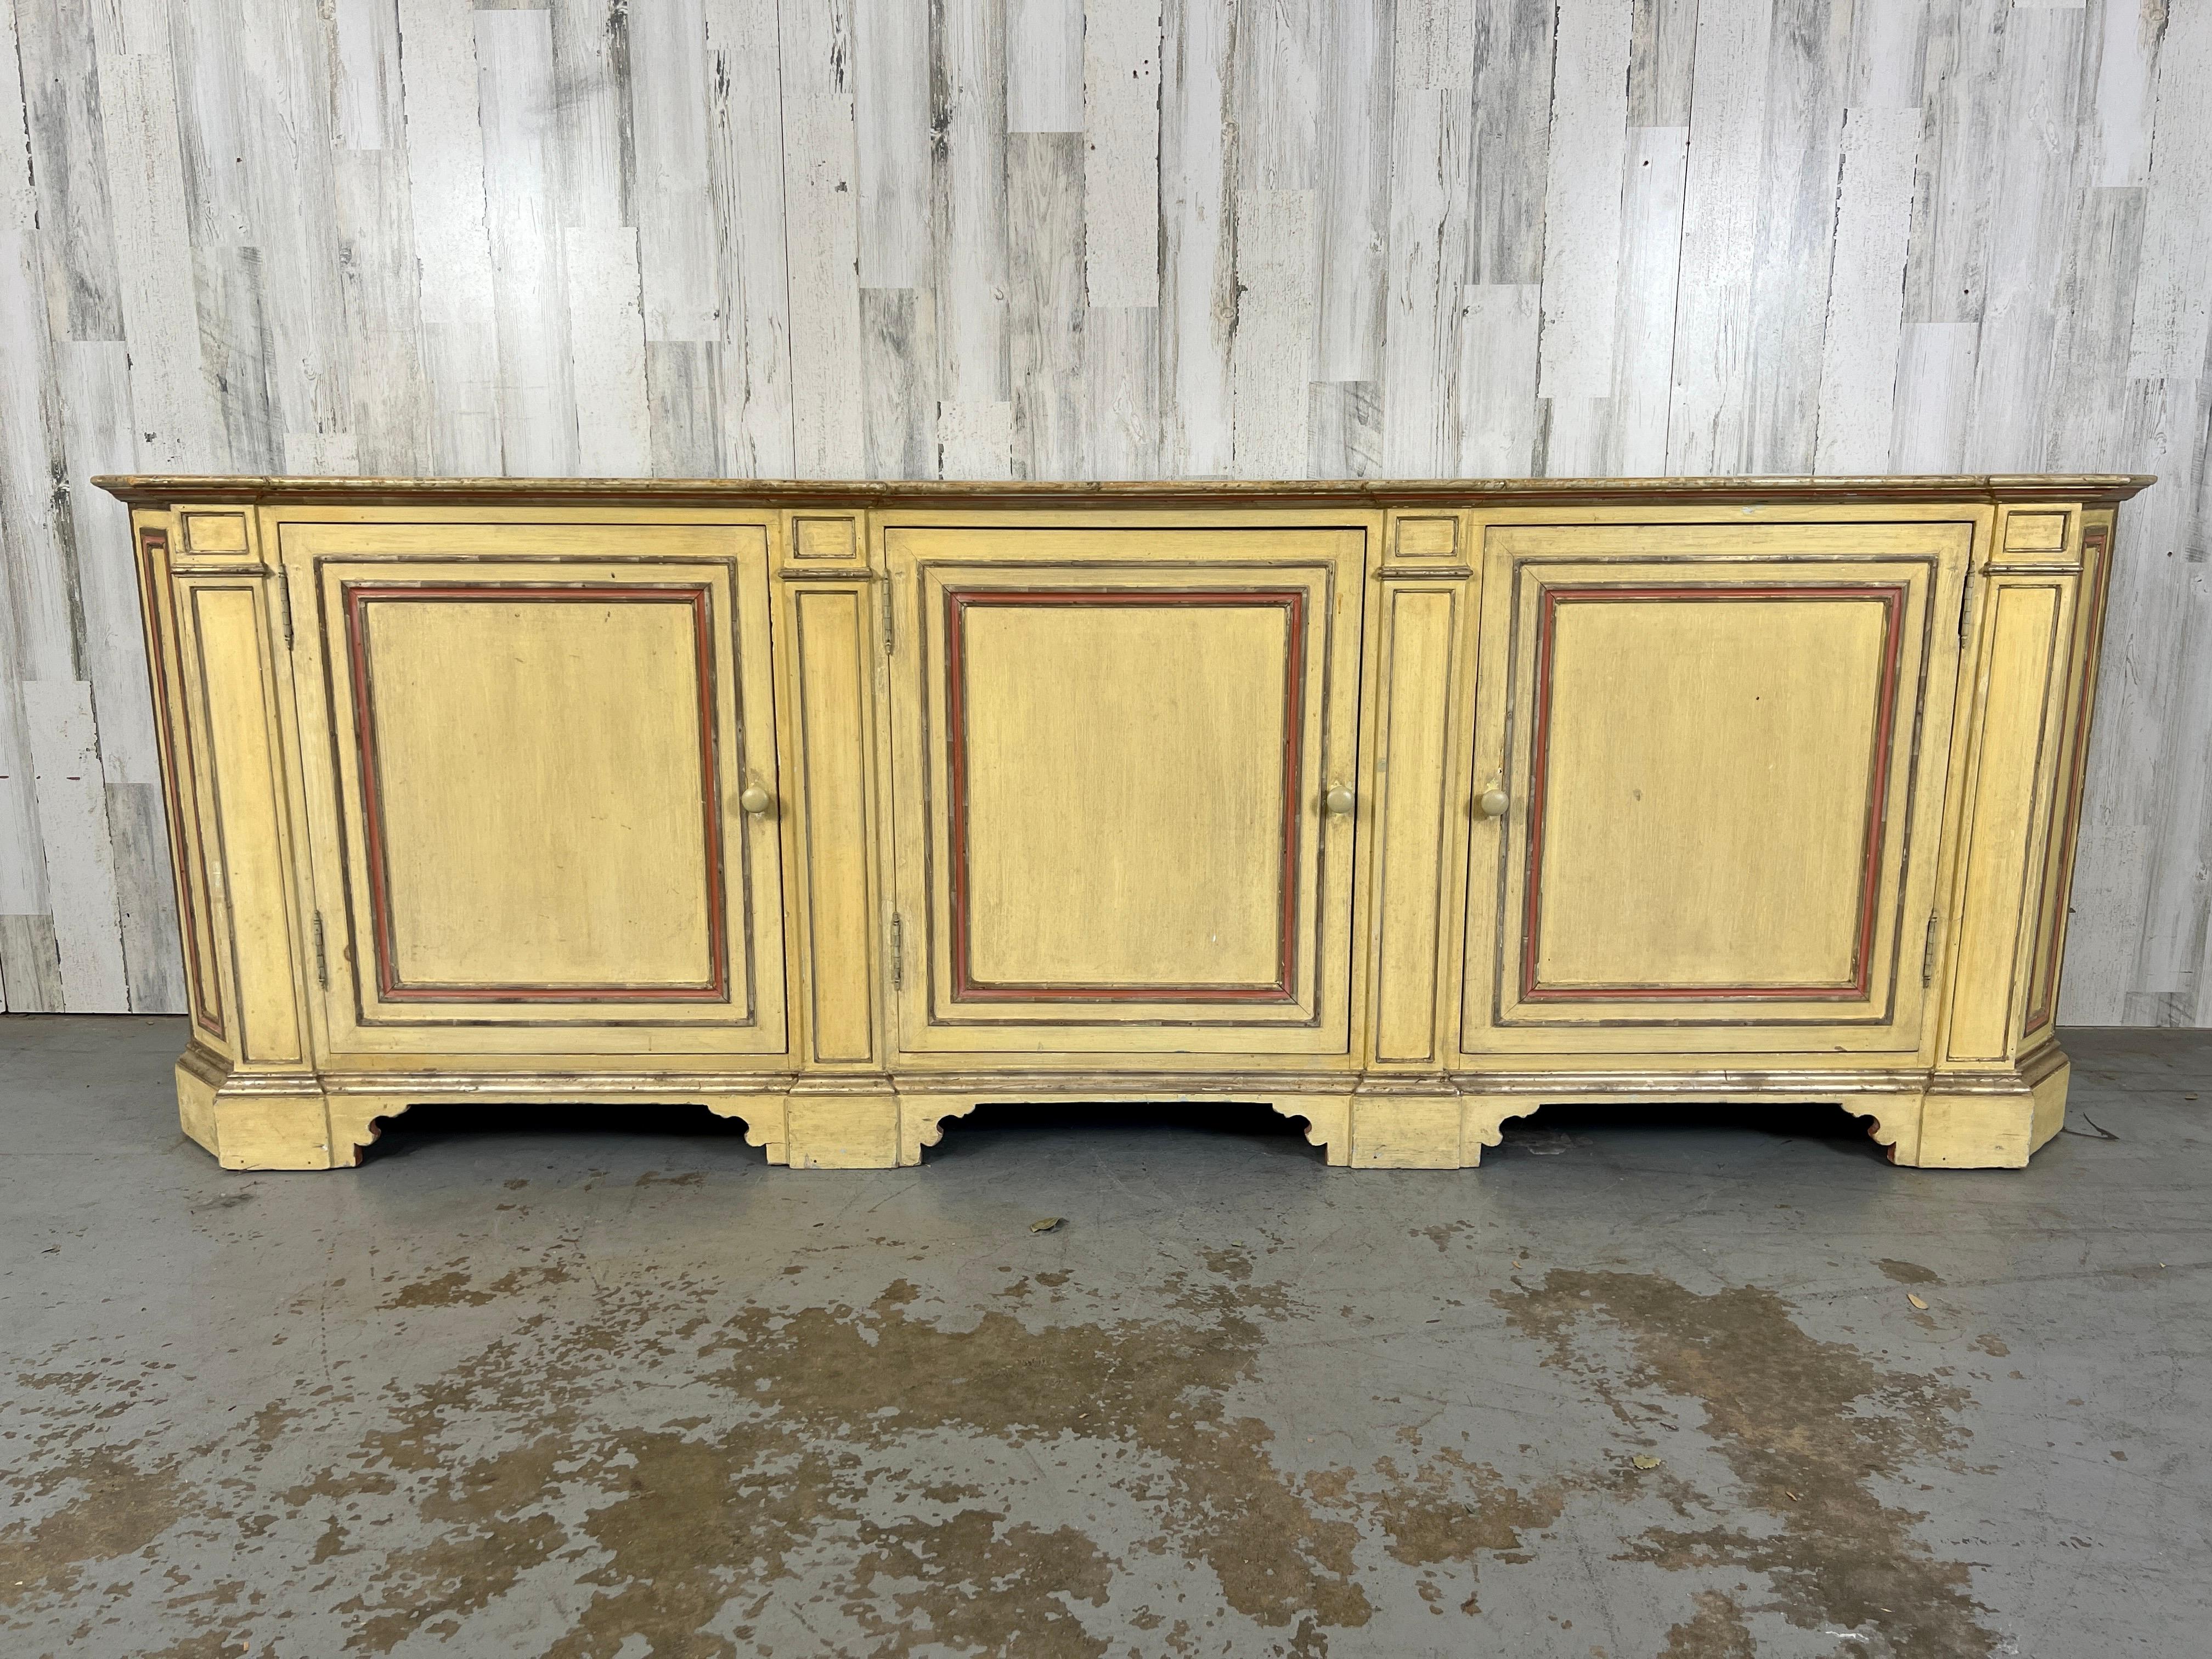 Rustic Italian Hand Painted Sideboard With Faux Marble Top. Very common in the countryside of Italy to paint furniture to have the appearance of being a more expensive. Three doors that reveal a painted interior with a shelf that extends the length